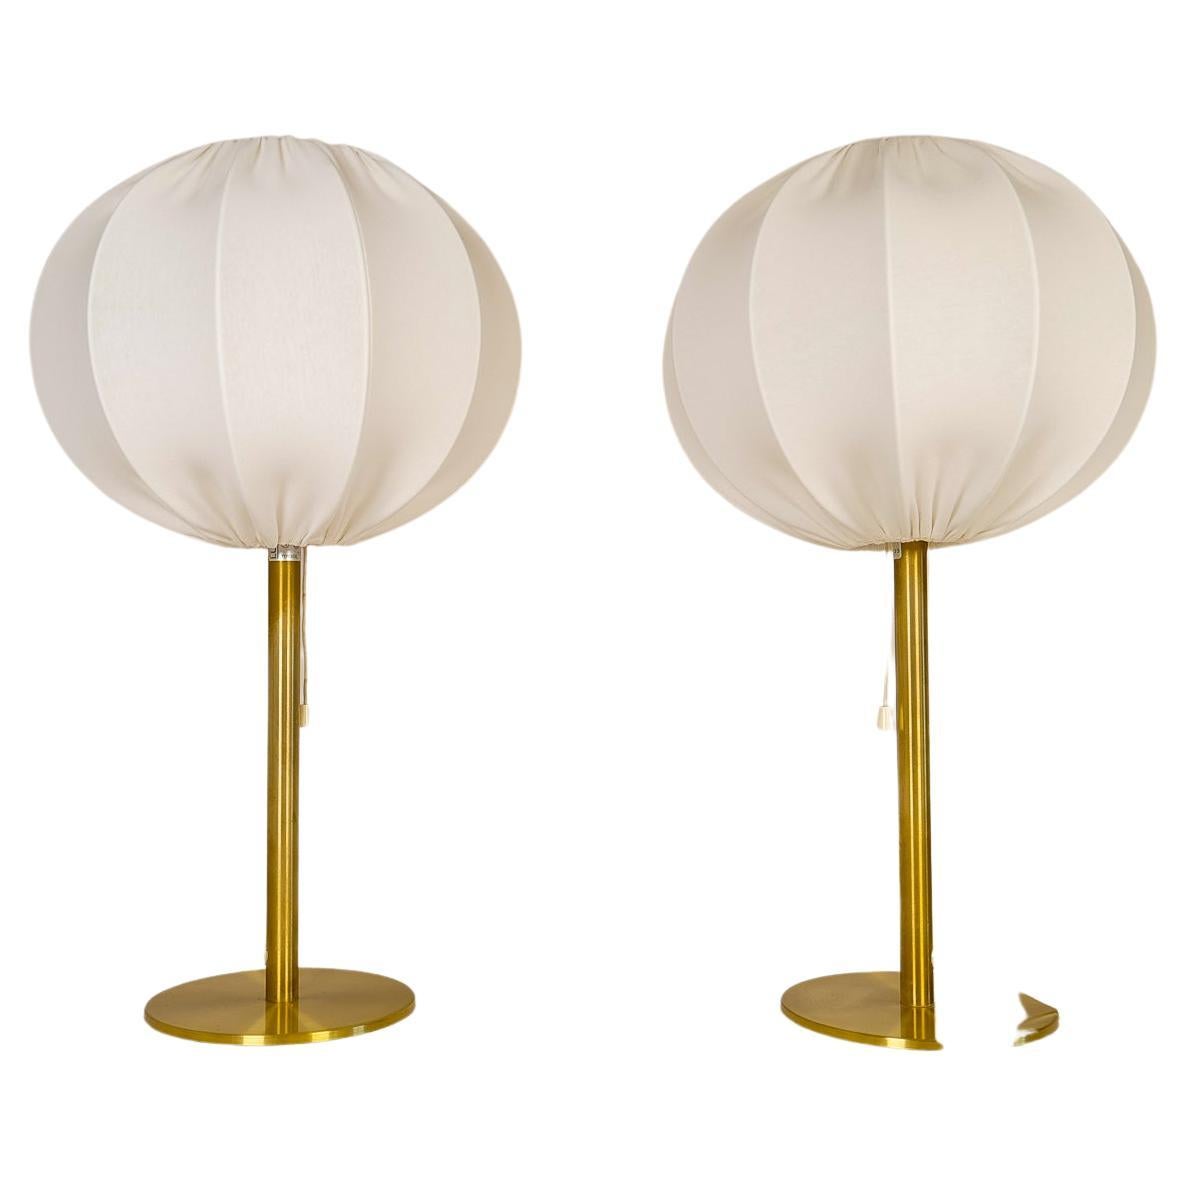 These Mid-Century Modern table lamps were manufactured in Sweden for Luxus. The rounded base and rod are made in brass. These lamps come with both the new cotton cloud rounded shades made in Sweden as well as the original upplight shades in acrylic.